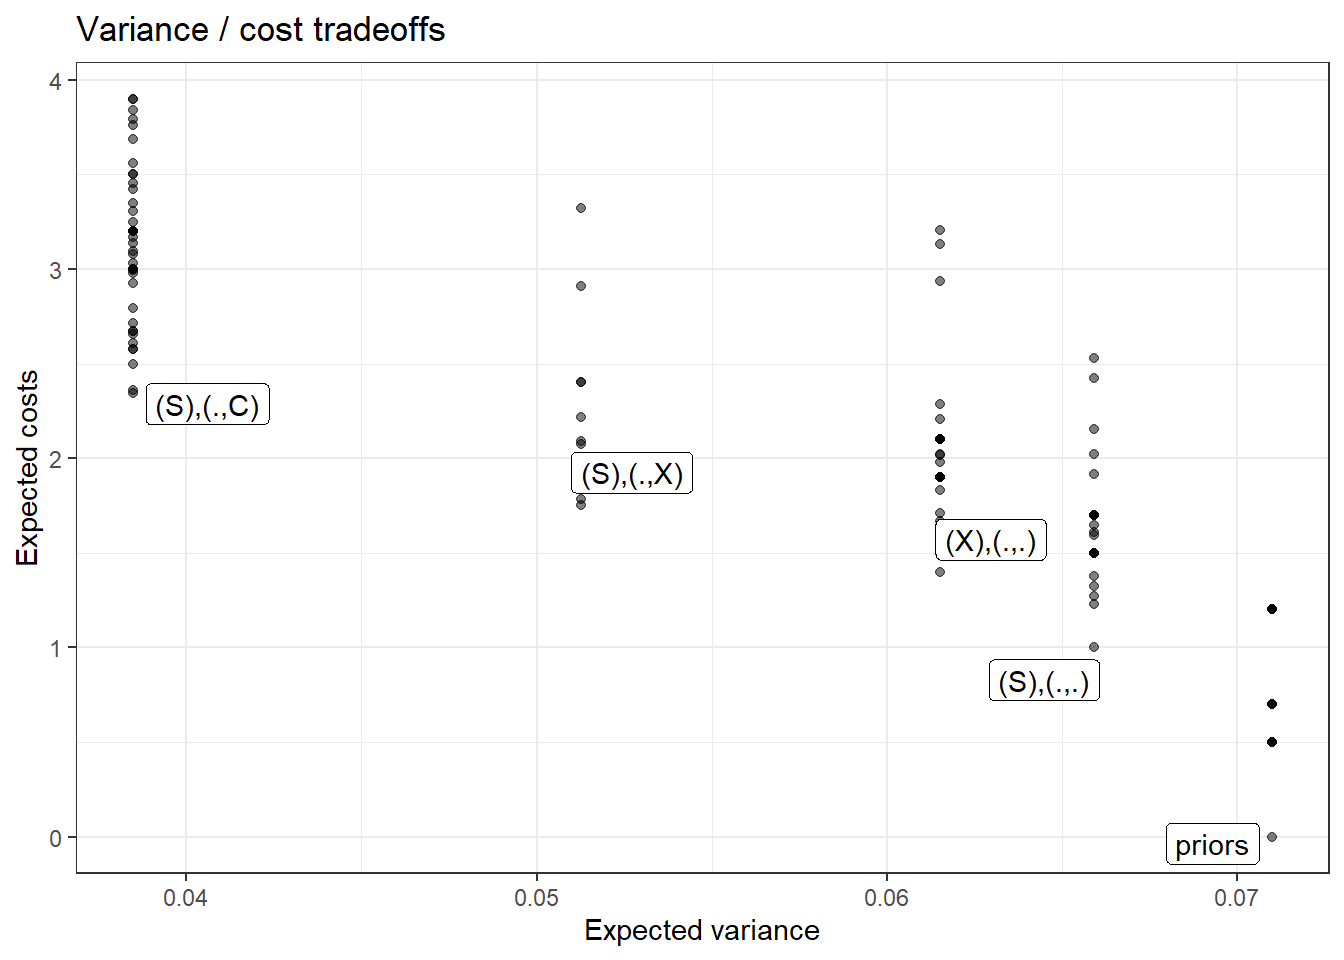 Cost-variance trade-offs for all dynamic strategies involving up to two clues, under base government-survival model, with undominated strategies labeled. In each label, the term in first set of parentheses indicates which clue is observed first. The two elements in the second set of parentheses indicate which clue or none (.) is to be observed if the first clue realization is 0 and if it is 1, respectively